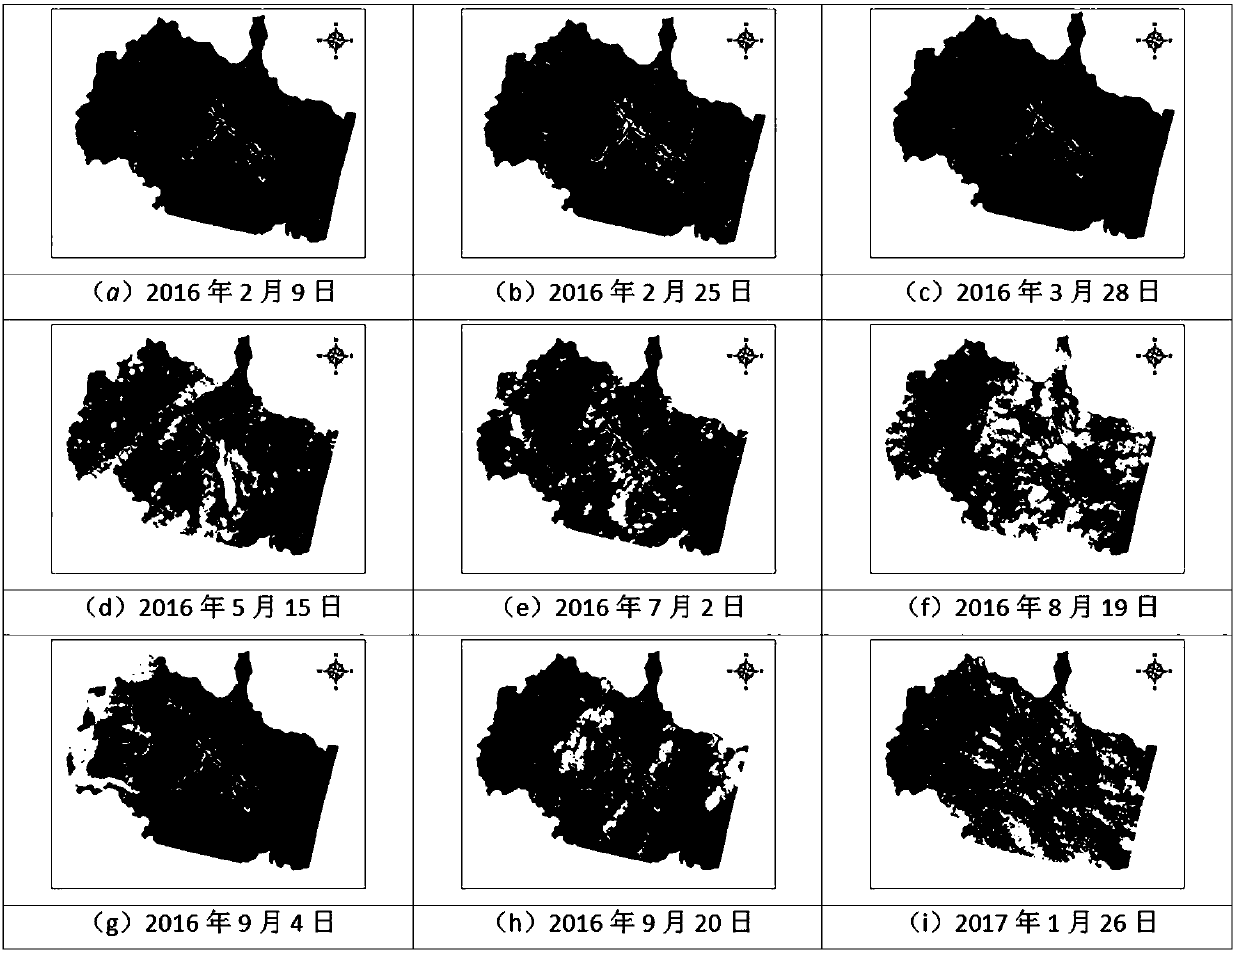 A method for determining a remote sensing optimal diagnosis time period of the harm of hyphantria cunea